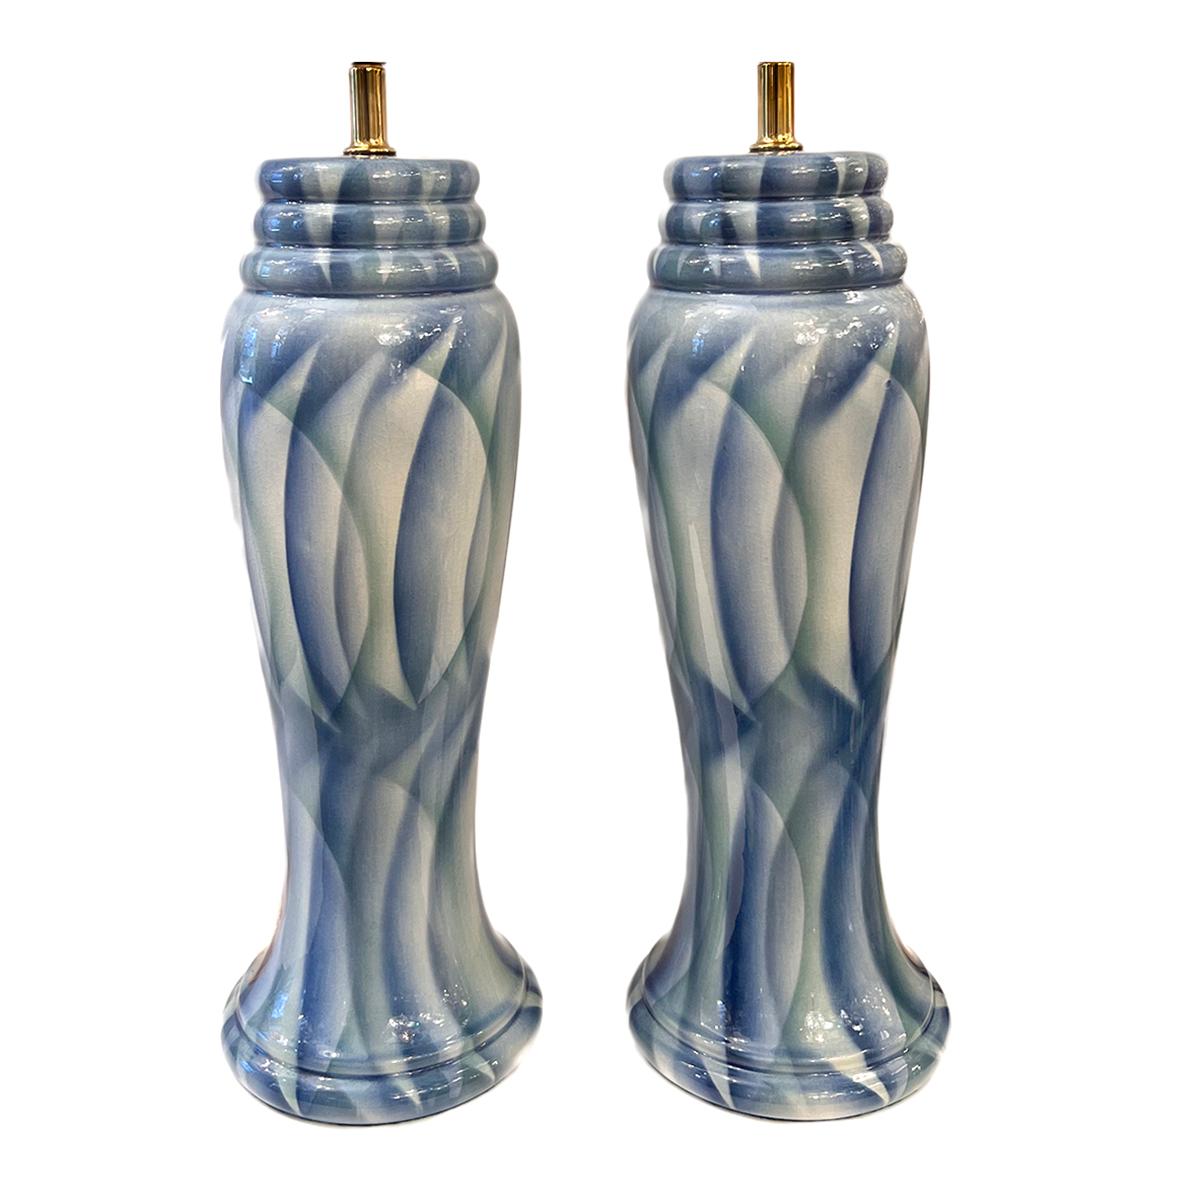 Pair of circa 1980's French blue porcelain lamps with waves pattern.

Measurements:
Height of body: 23.75